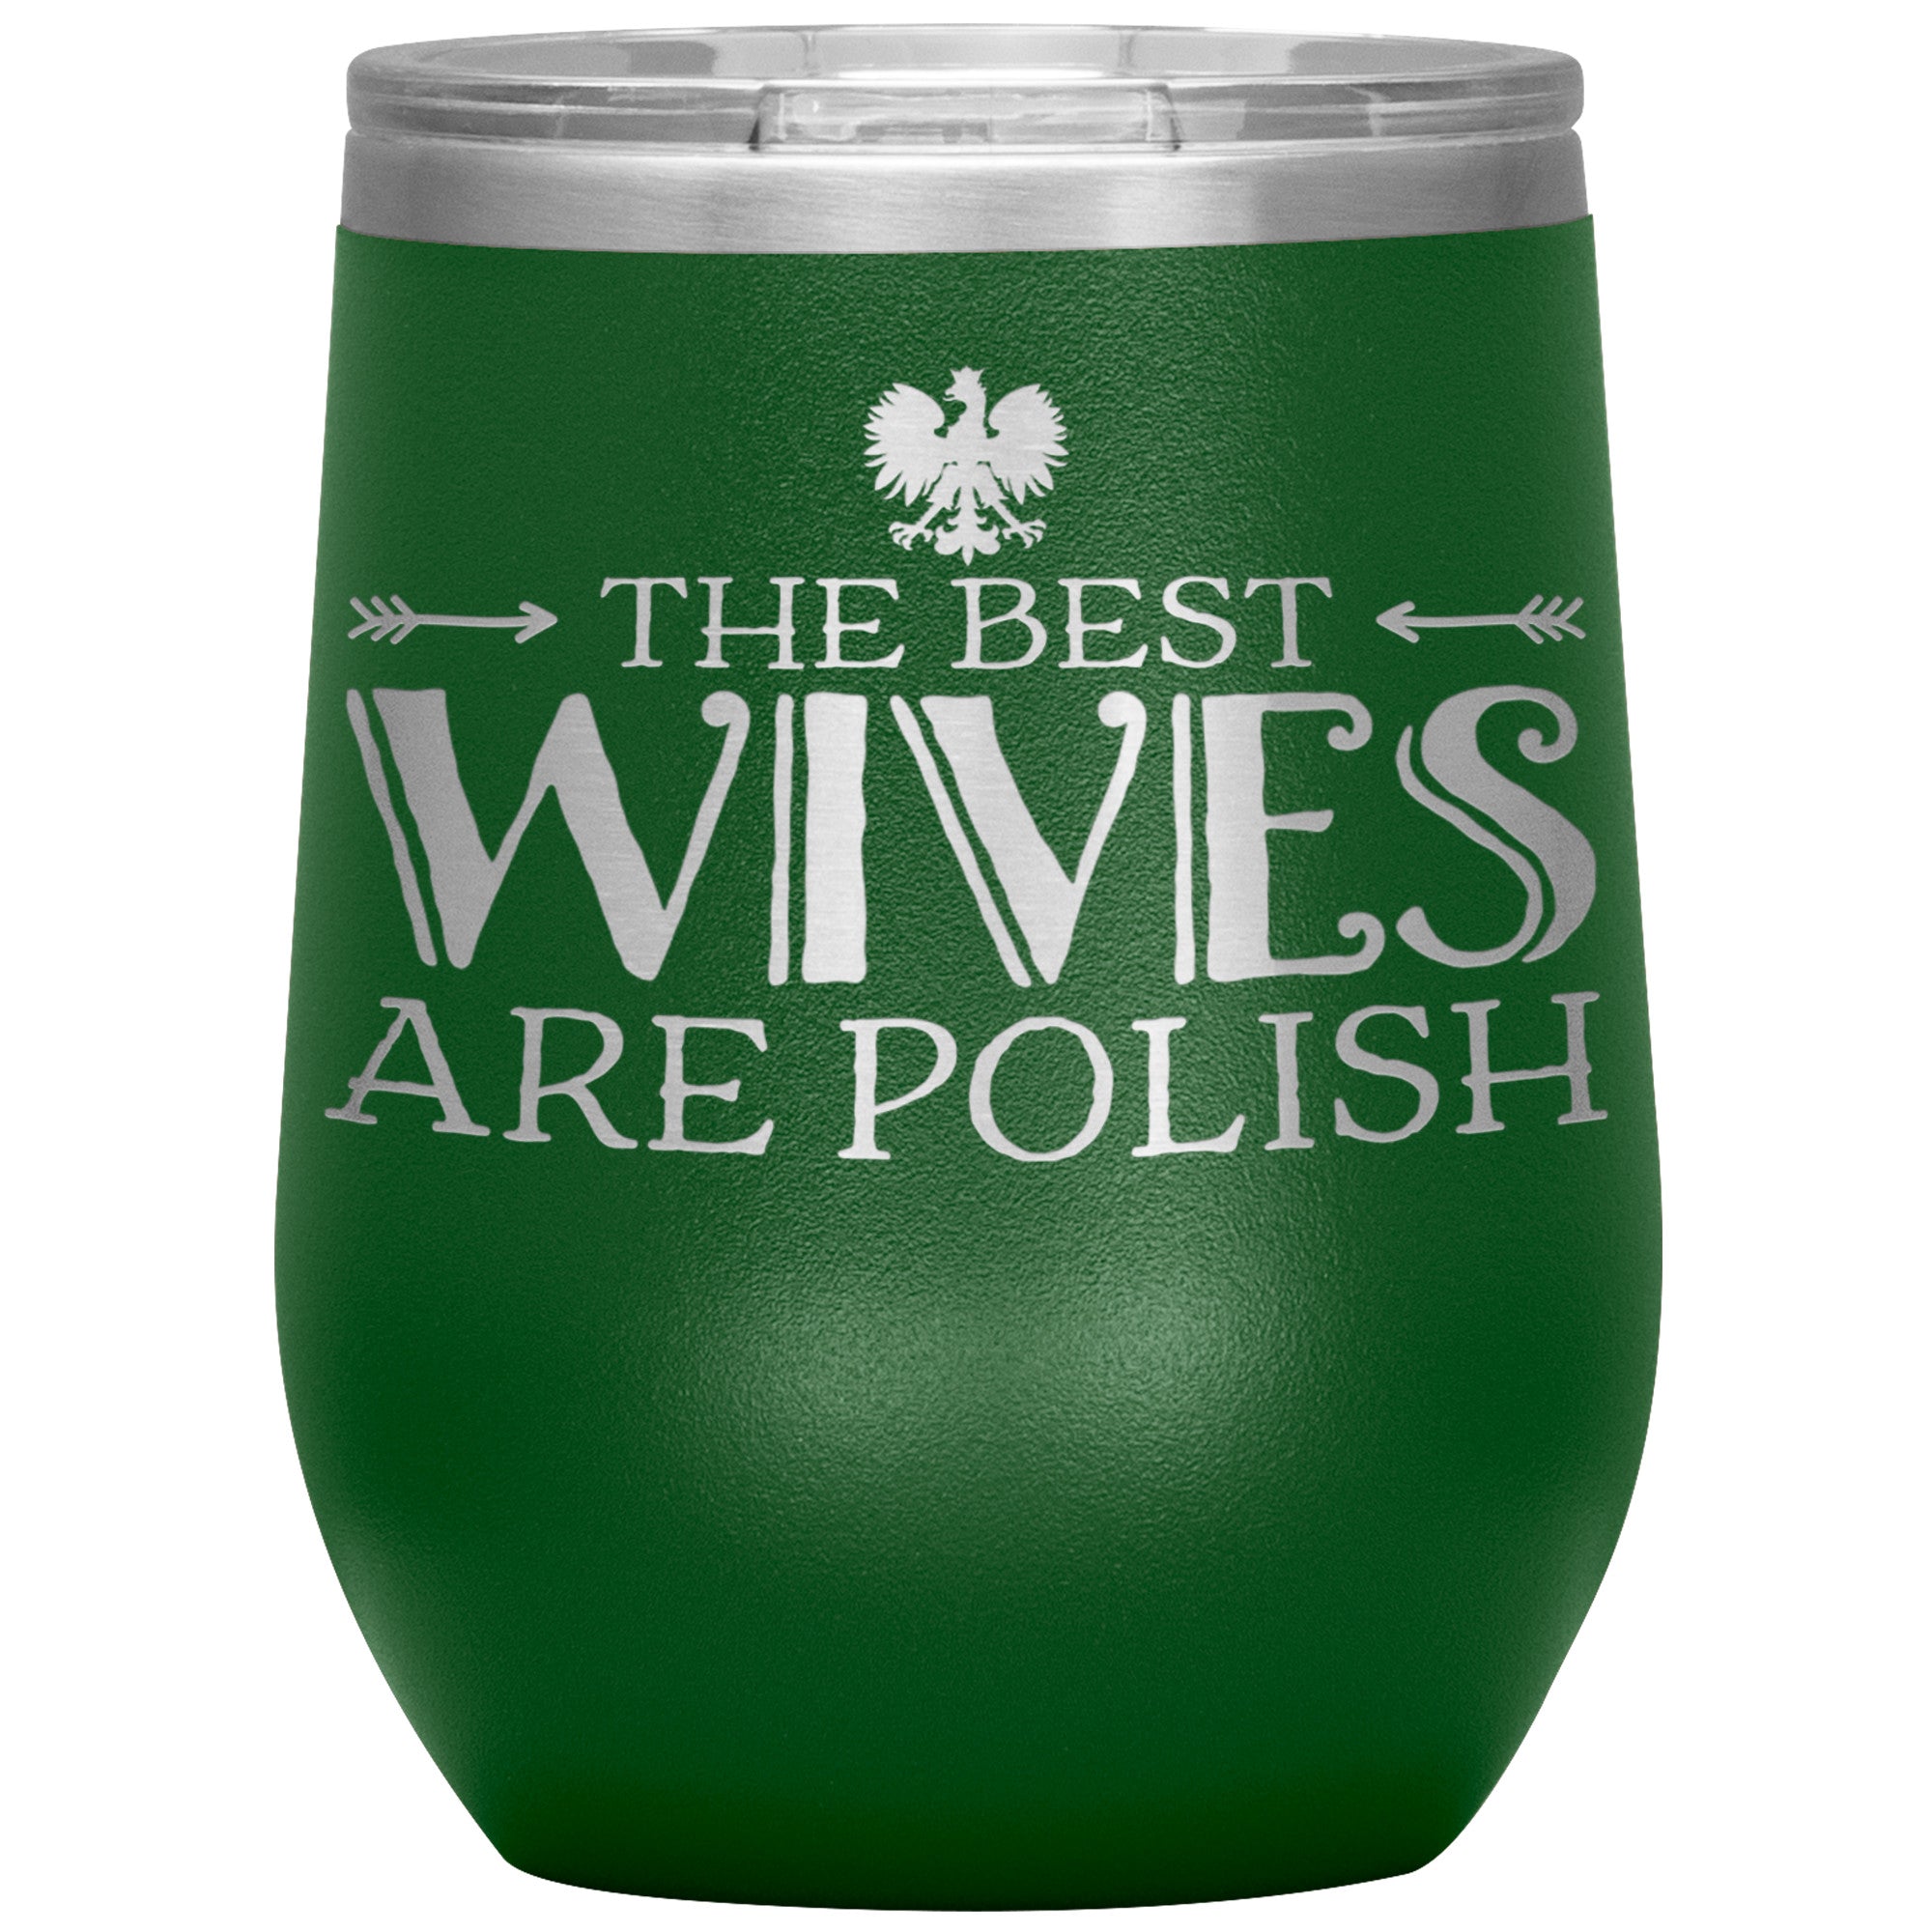 The Best Wives Are Polish Insulated Wine Tumbler Tumblers teelaunch Green  